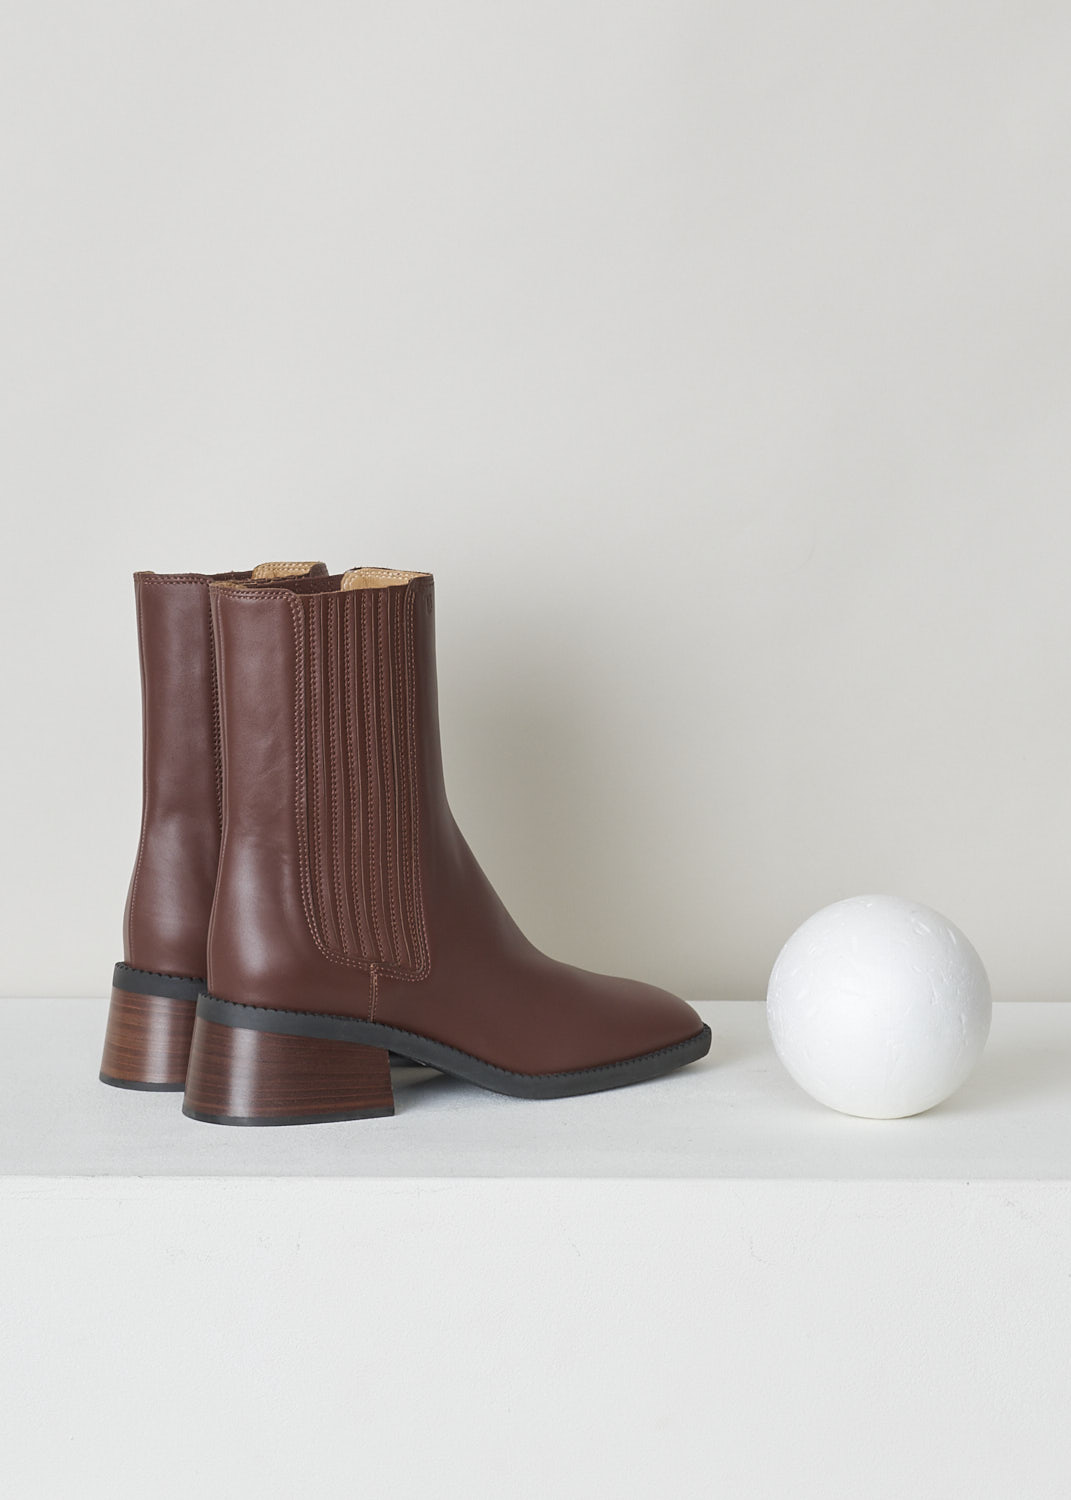 TODS, WARM BROWN BOOTS WITH GUSSETED SIDES, XXW48K0FX80TFSS202_T55_TRONCH_ELAST, Brown, Back, These warm brown leather slip-on boots feature elasticated gusseted sides with a ribbed pattern, a squared toe and a block heel in brown. 

